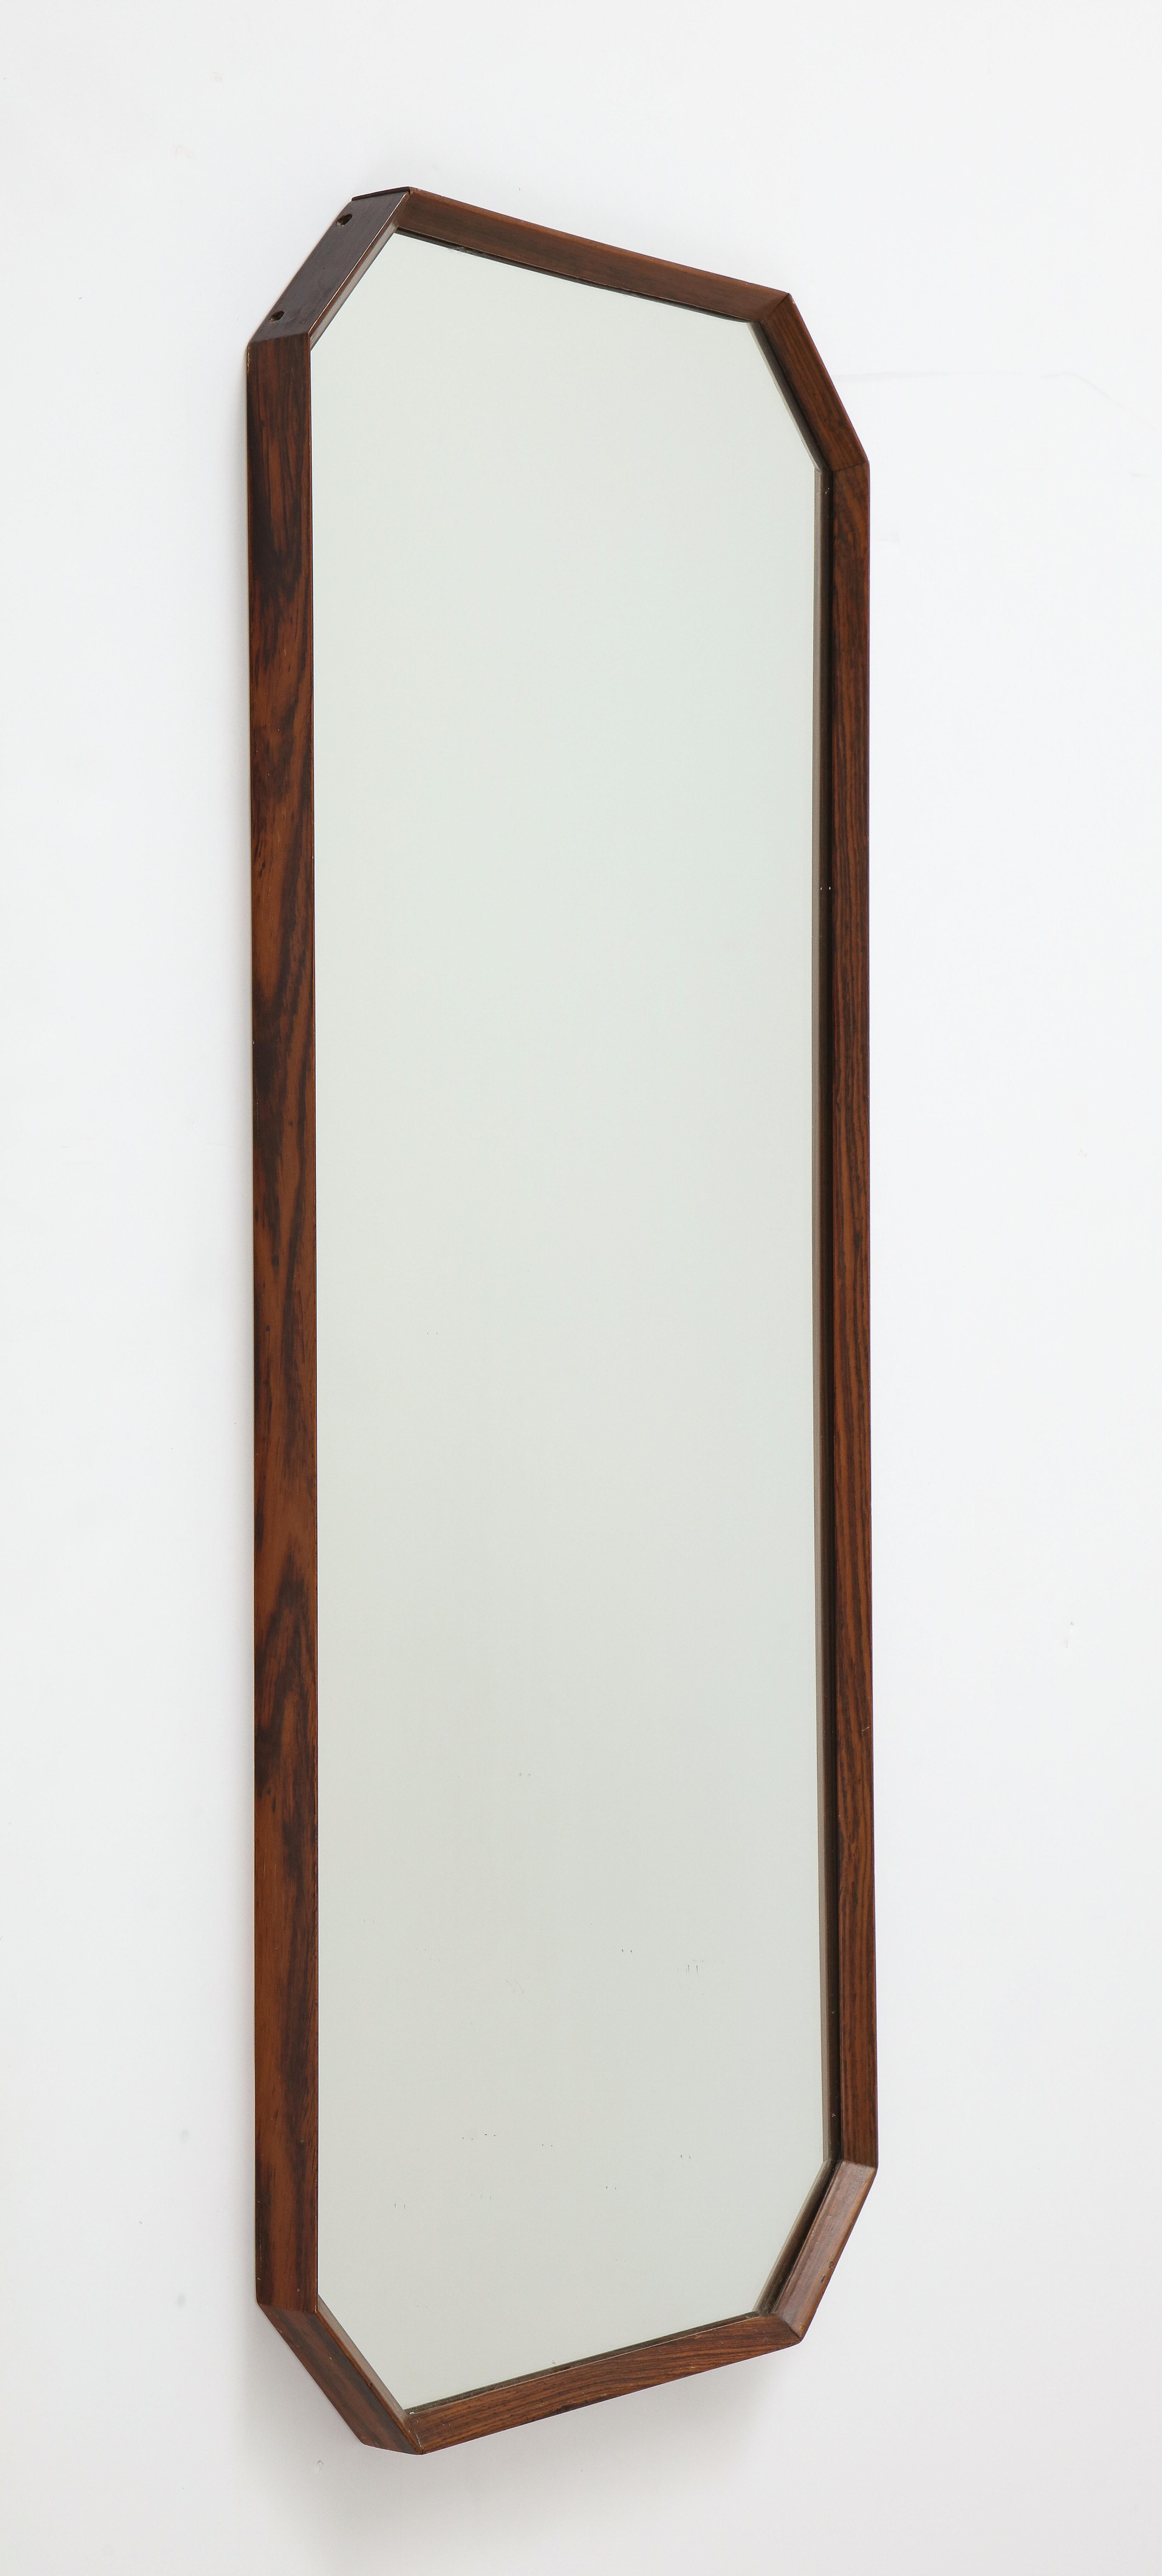 Mid-20th Century Italian 1960's Rosewood Octagonal Wall Mirror For Sale